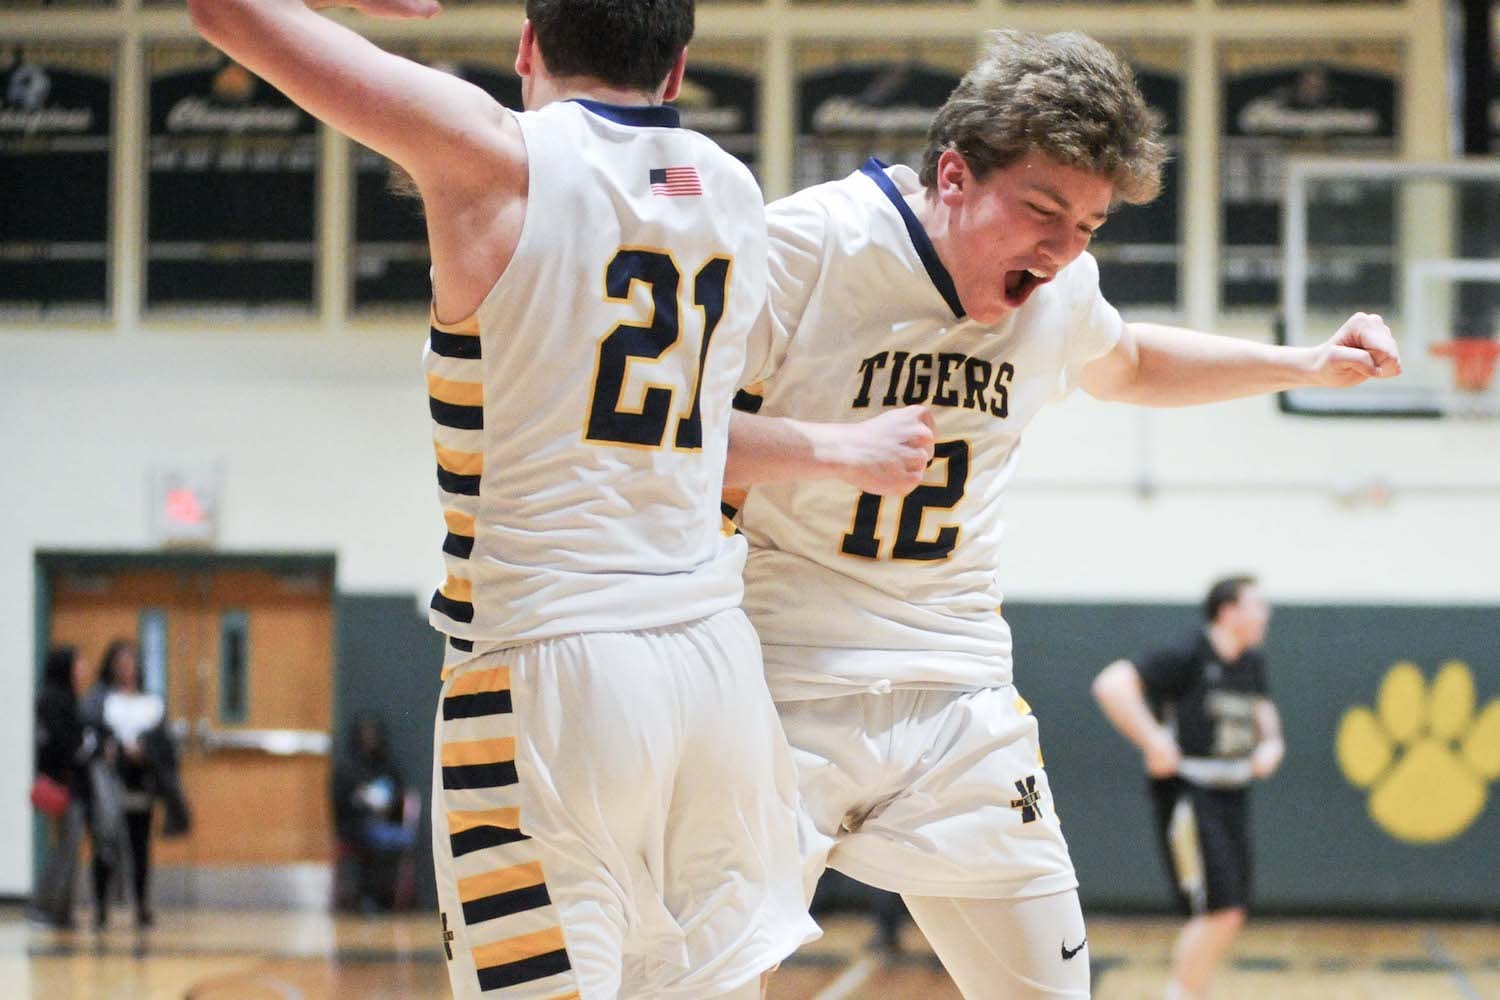 Northport Tigers Tame Commack Cougars in AA Semi | TBR News Media